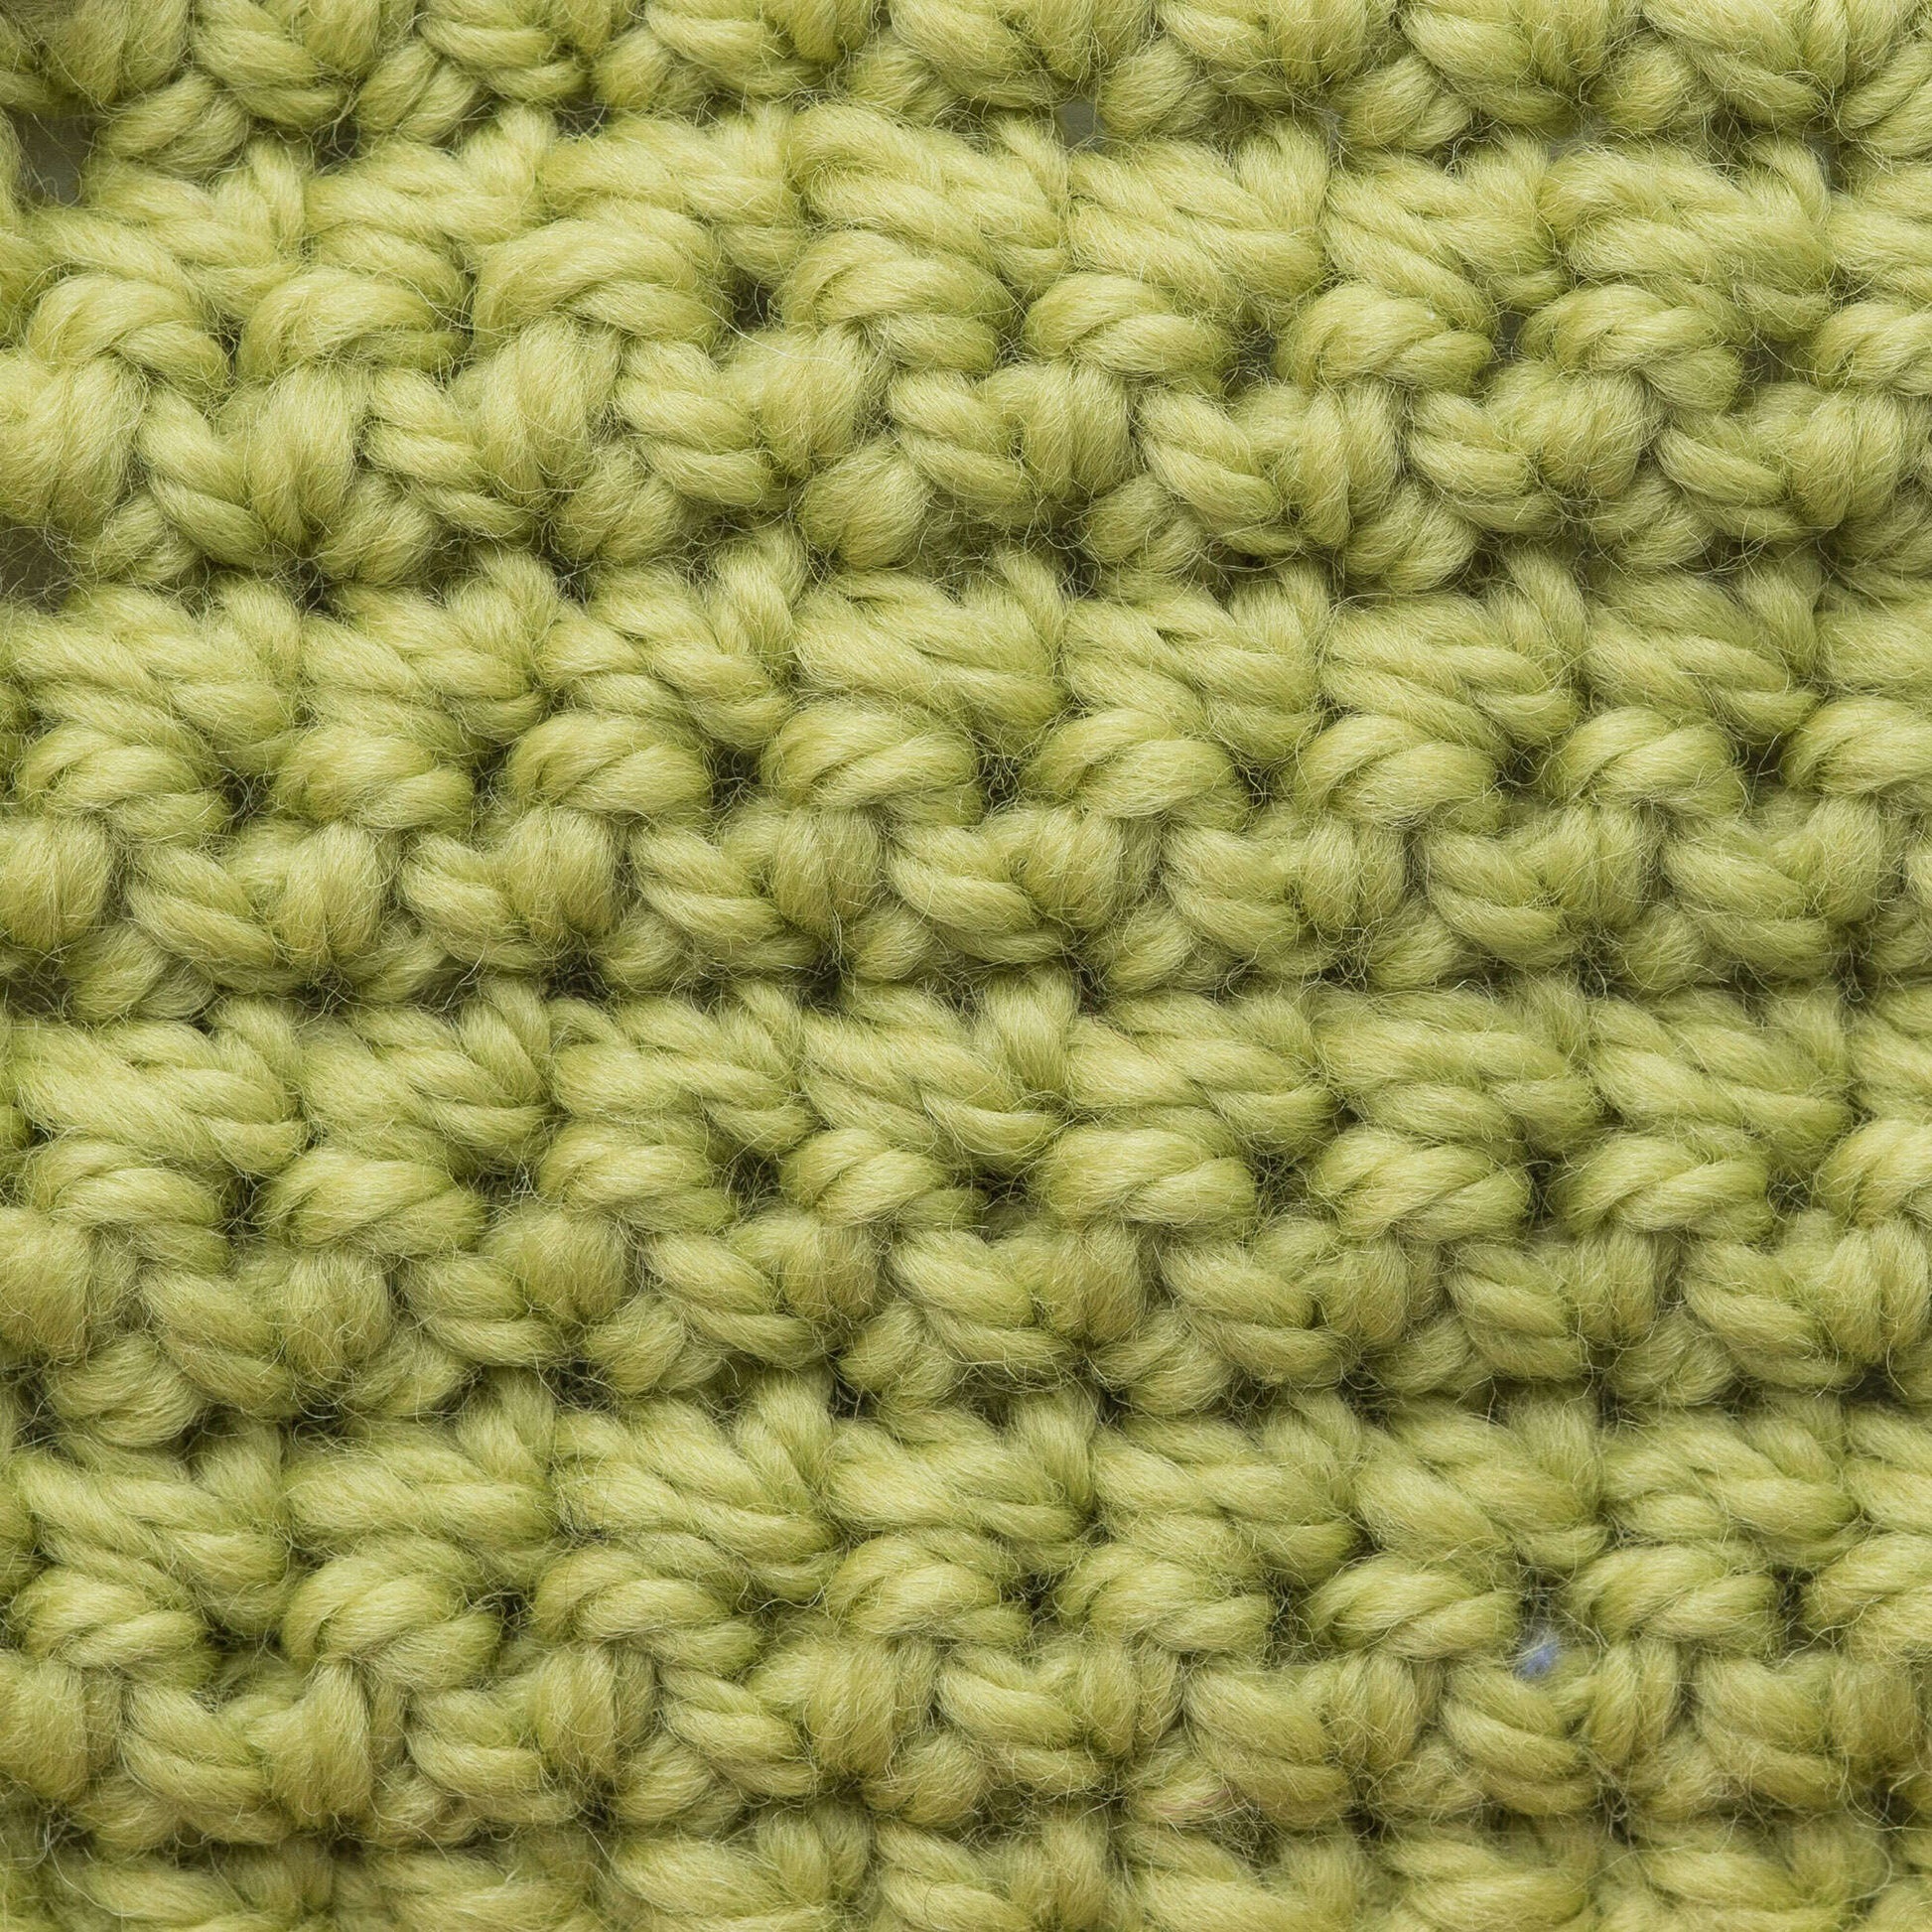 Patons Classic Wool Bulky Yarn - Discontinued Shades Spring Green